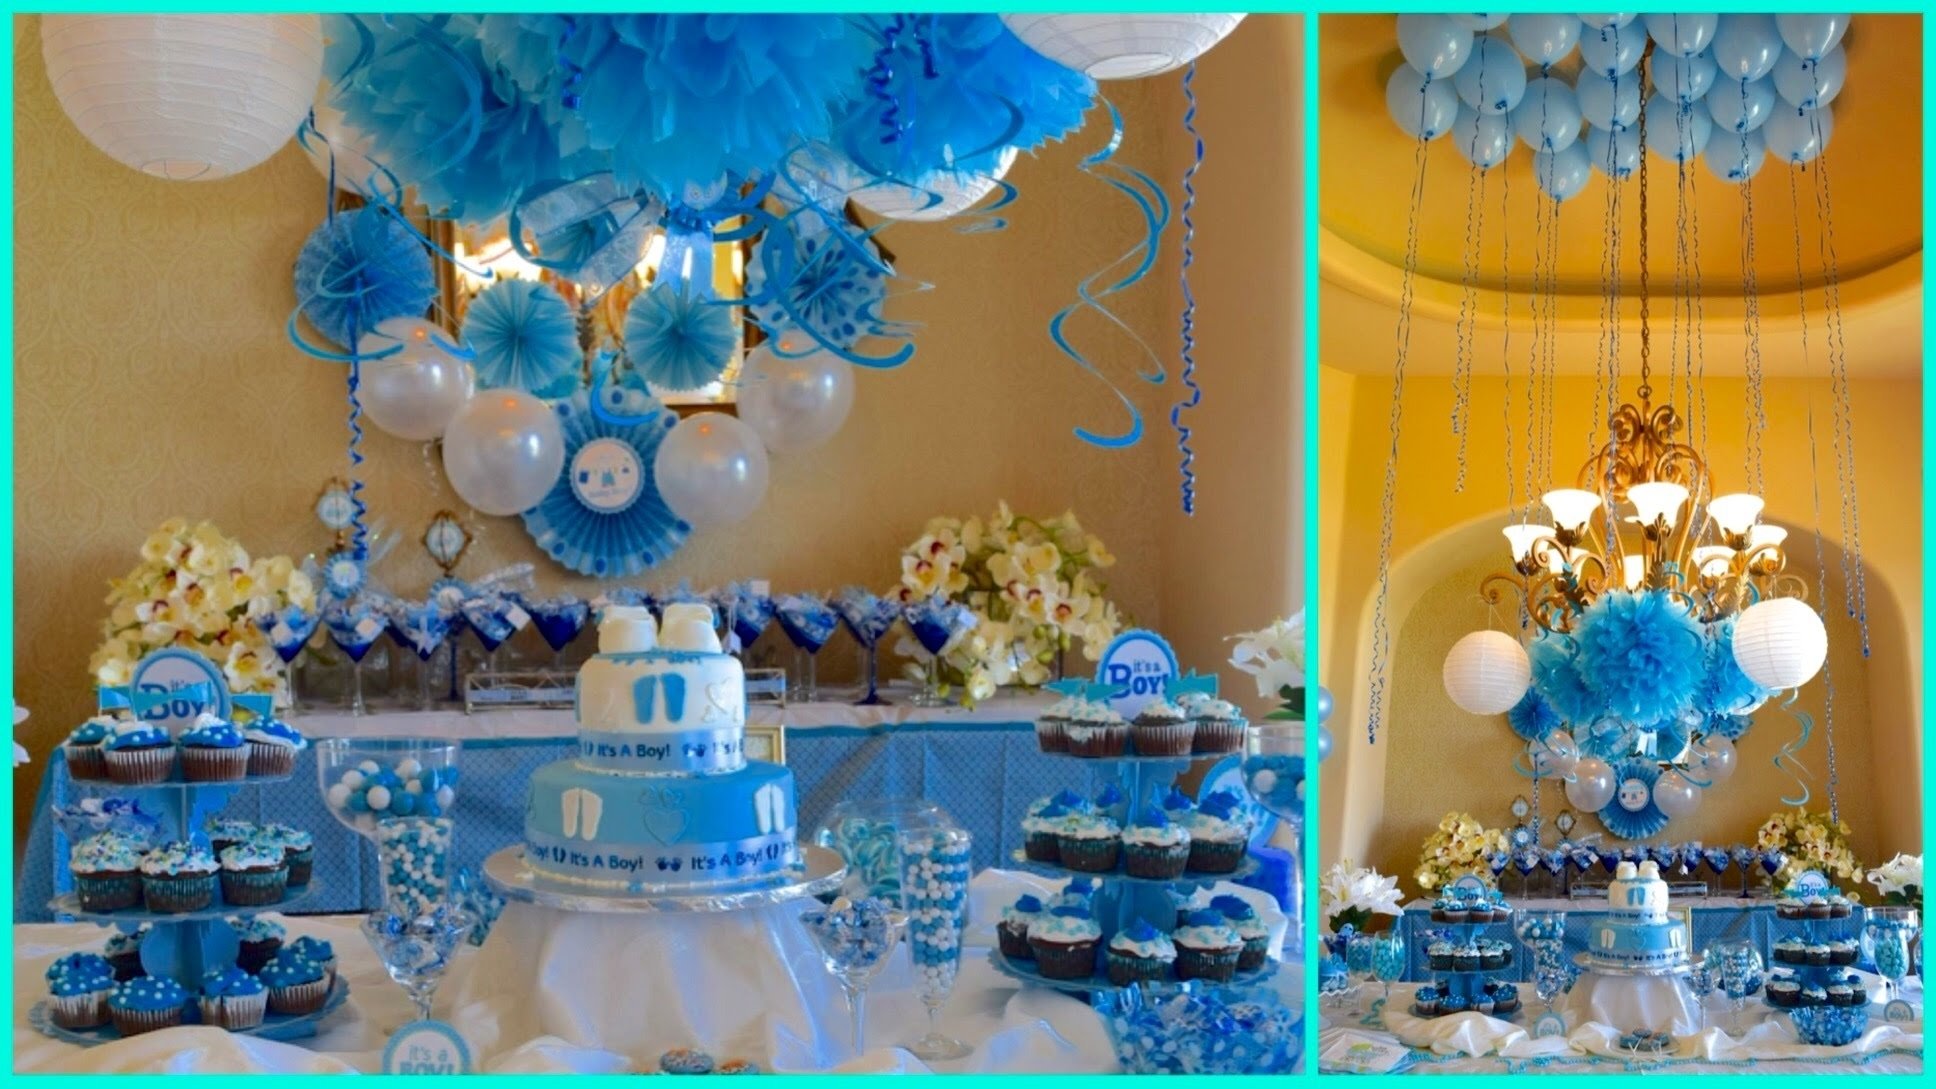 10 Perfect Baby Boy Baby Shower Themes Ideas baby shower ideas for boy blue theme youtube 5 2022